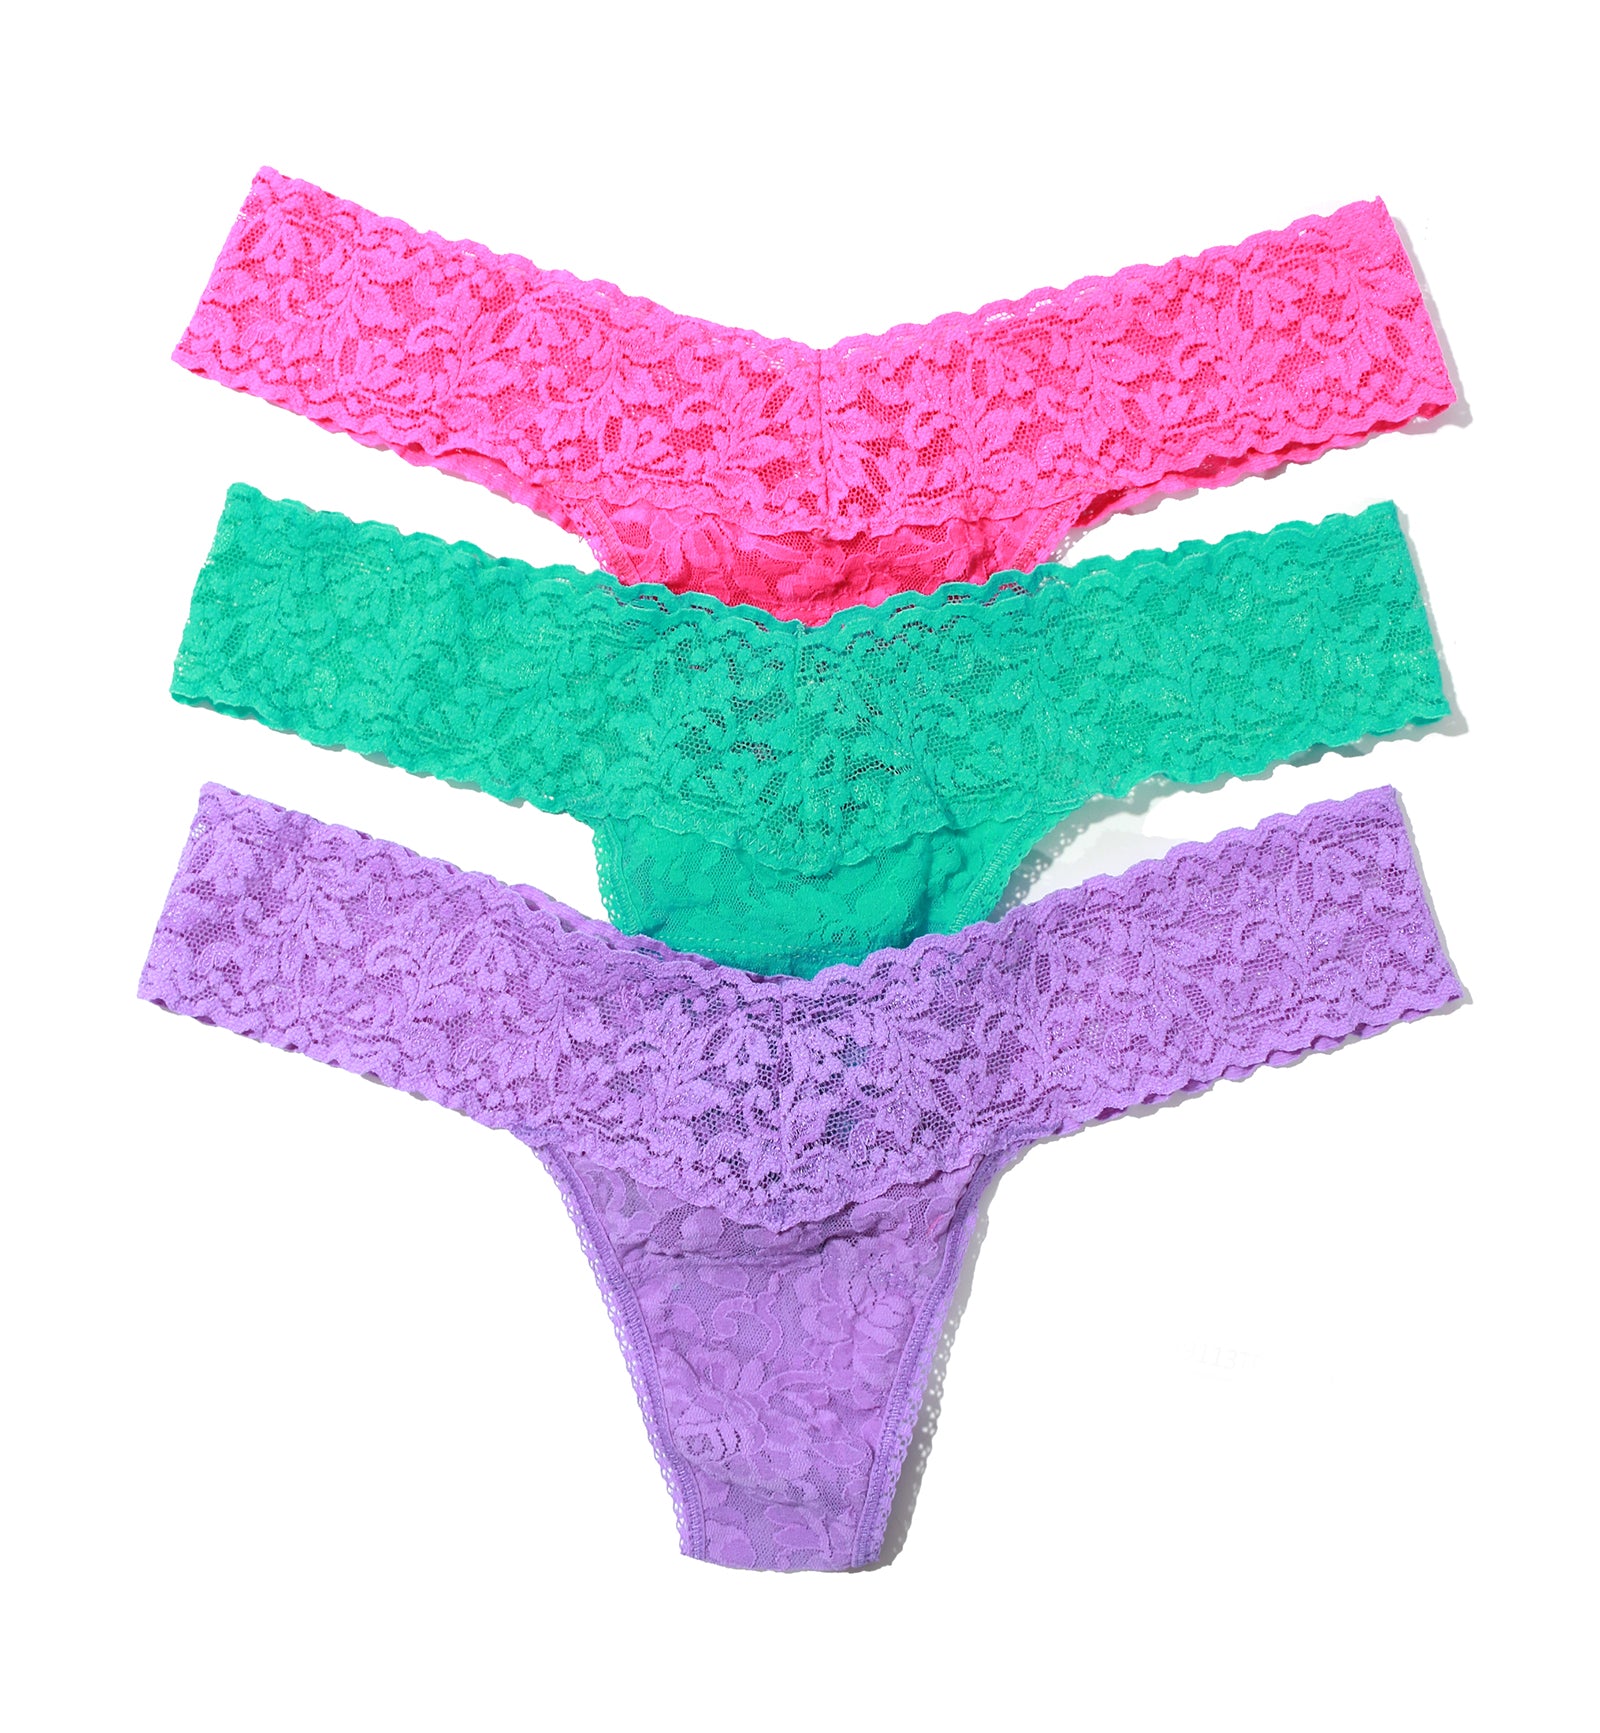 Hanky Panky 3-PACK Signature Lace Low Rise Thong (49113PK),Holiday23 RFSF - RFSF,One Size